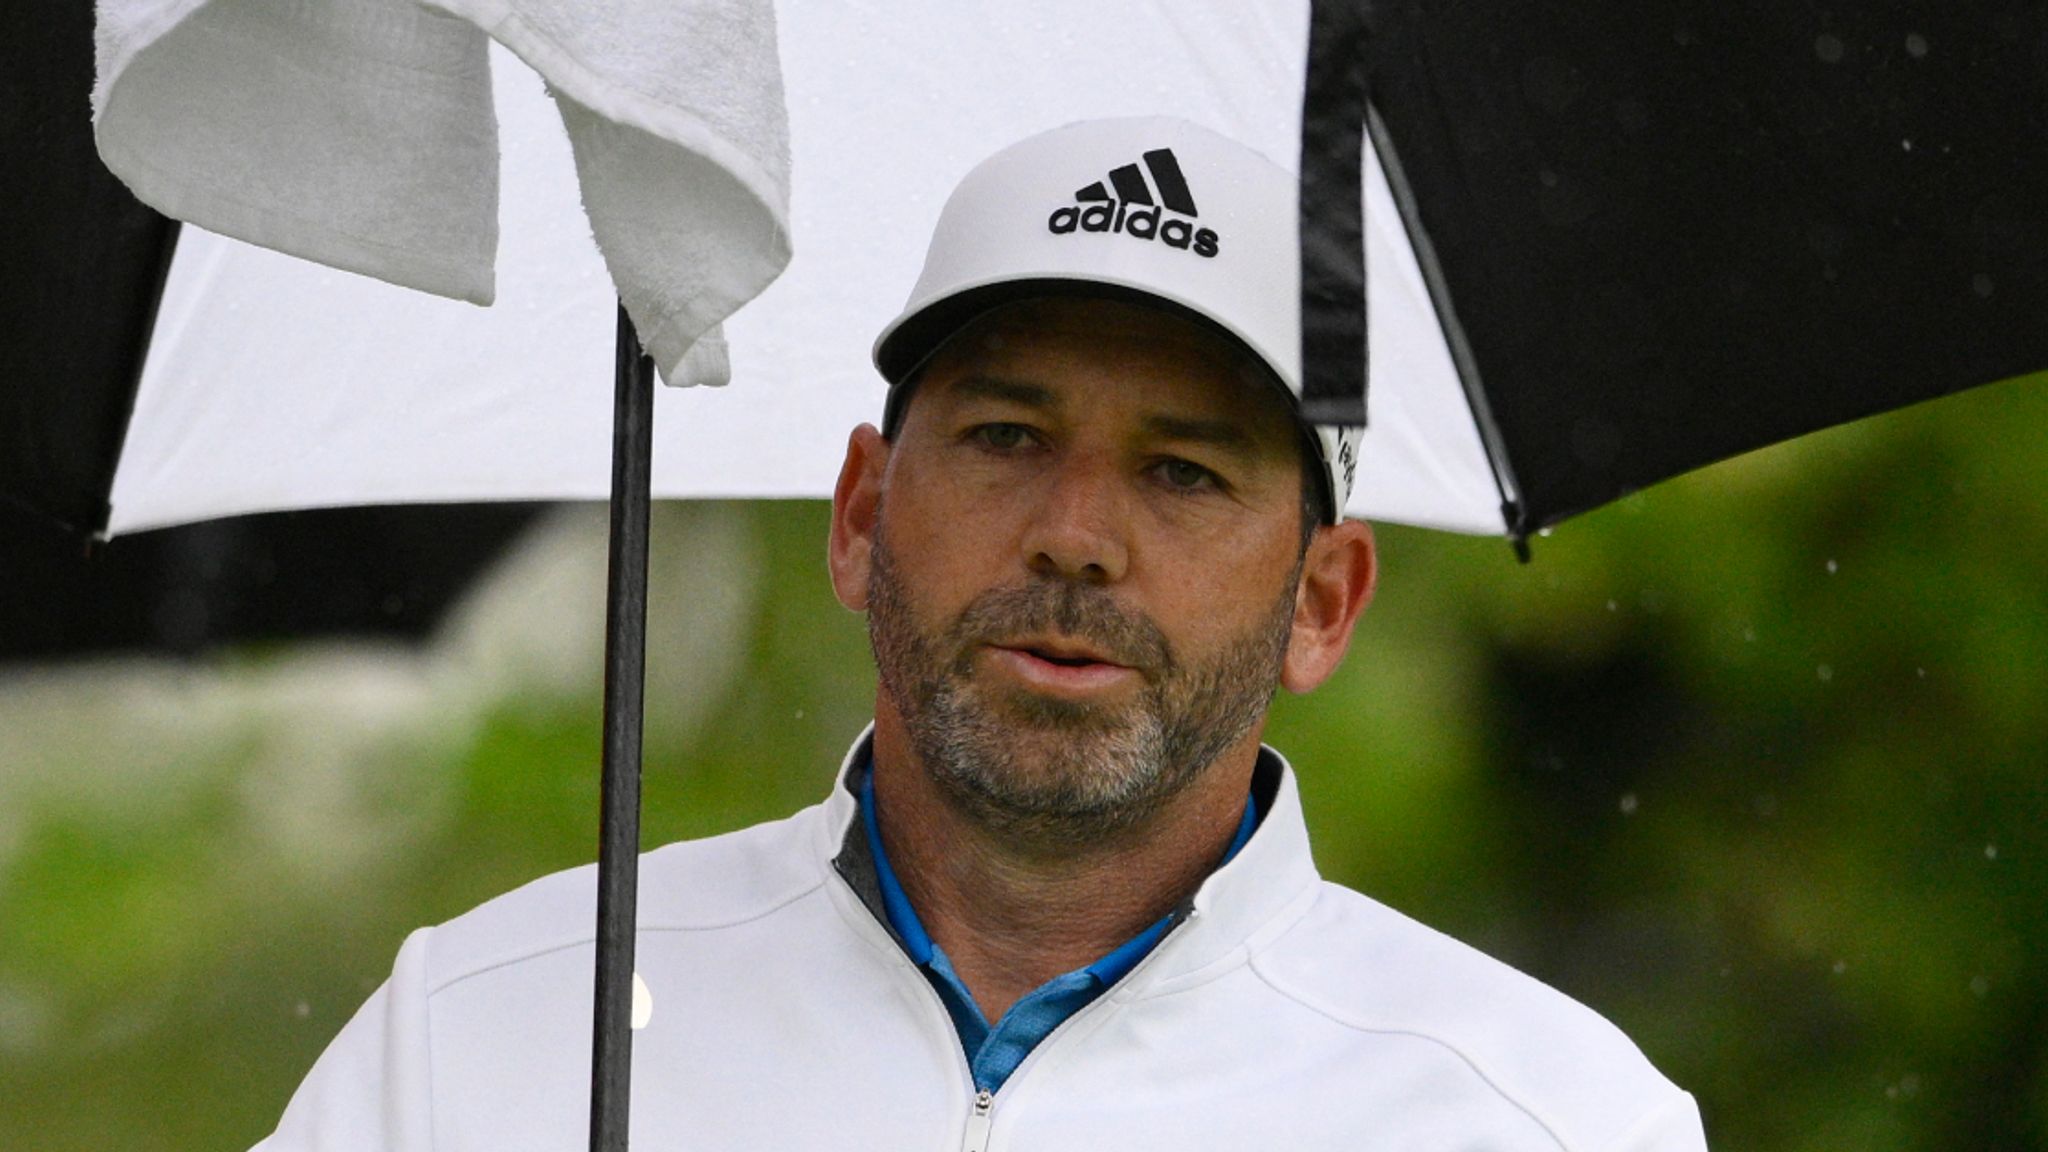 PGA Tour: Does Sergio Garcia need to apologise or clarify on-course comments made during Wells Fargo Championship? | Golf | Sky Sports